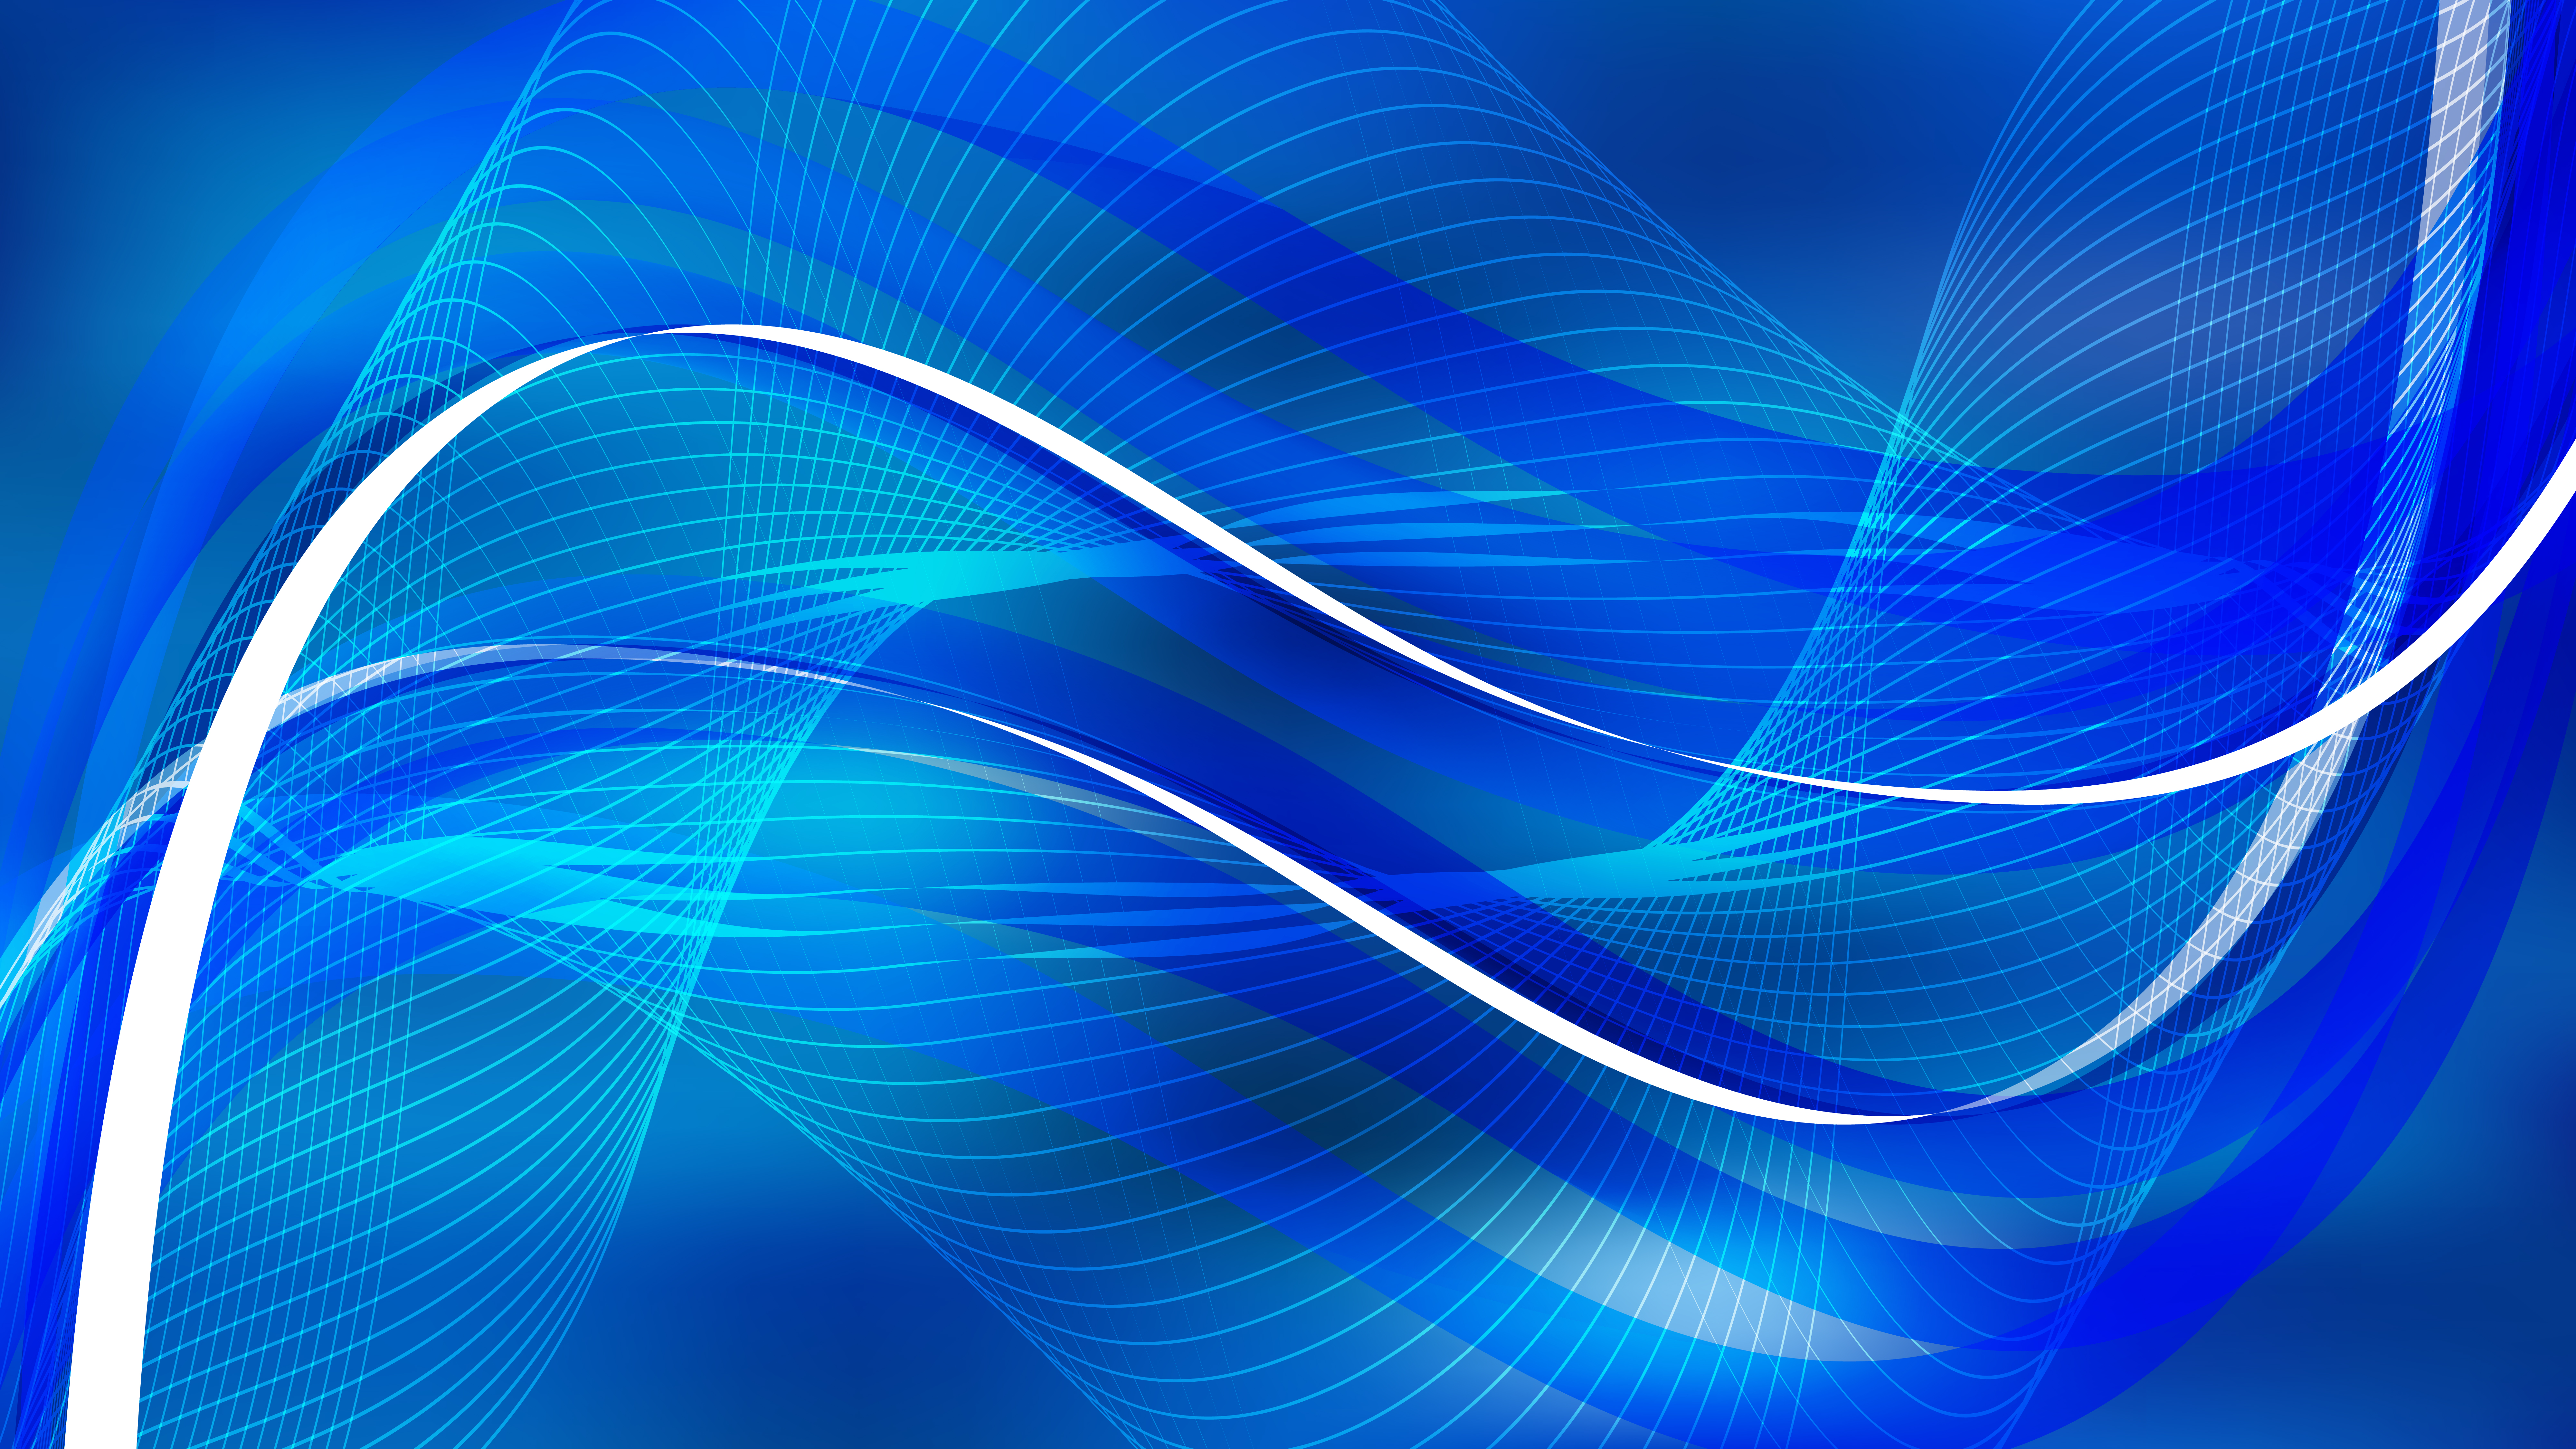 Free Abstract Dark Blue Flow Curves Background Vector Image